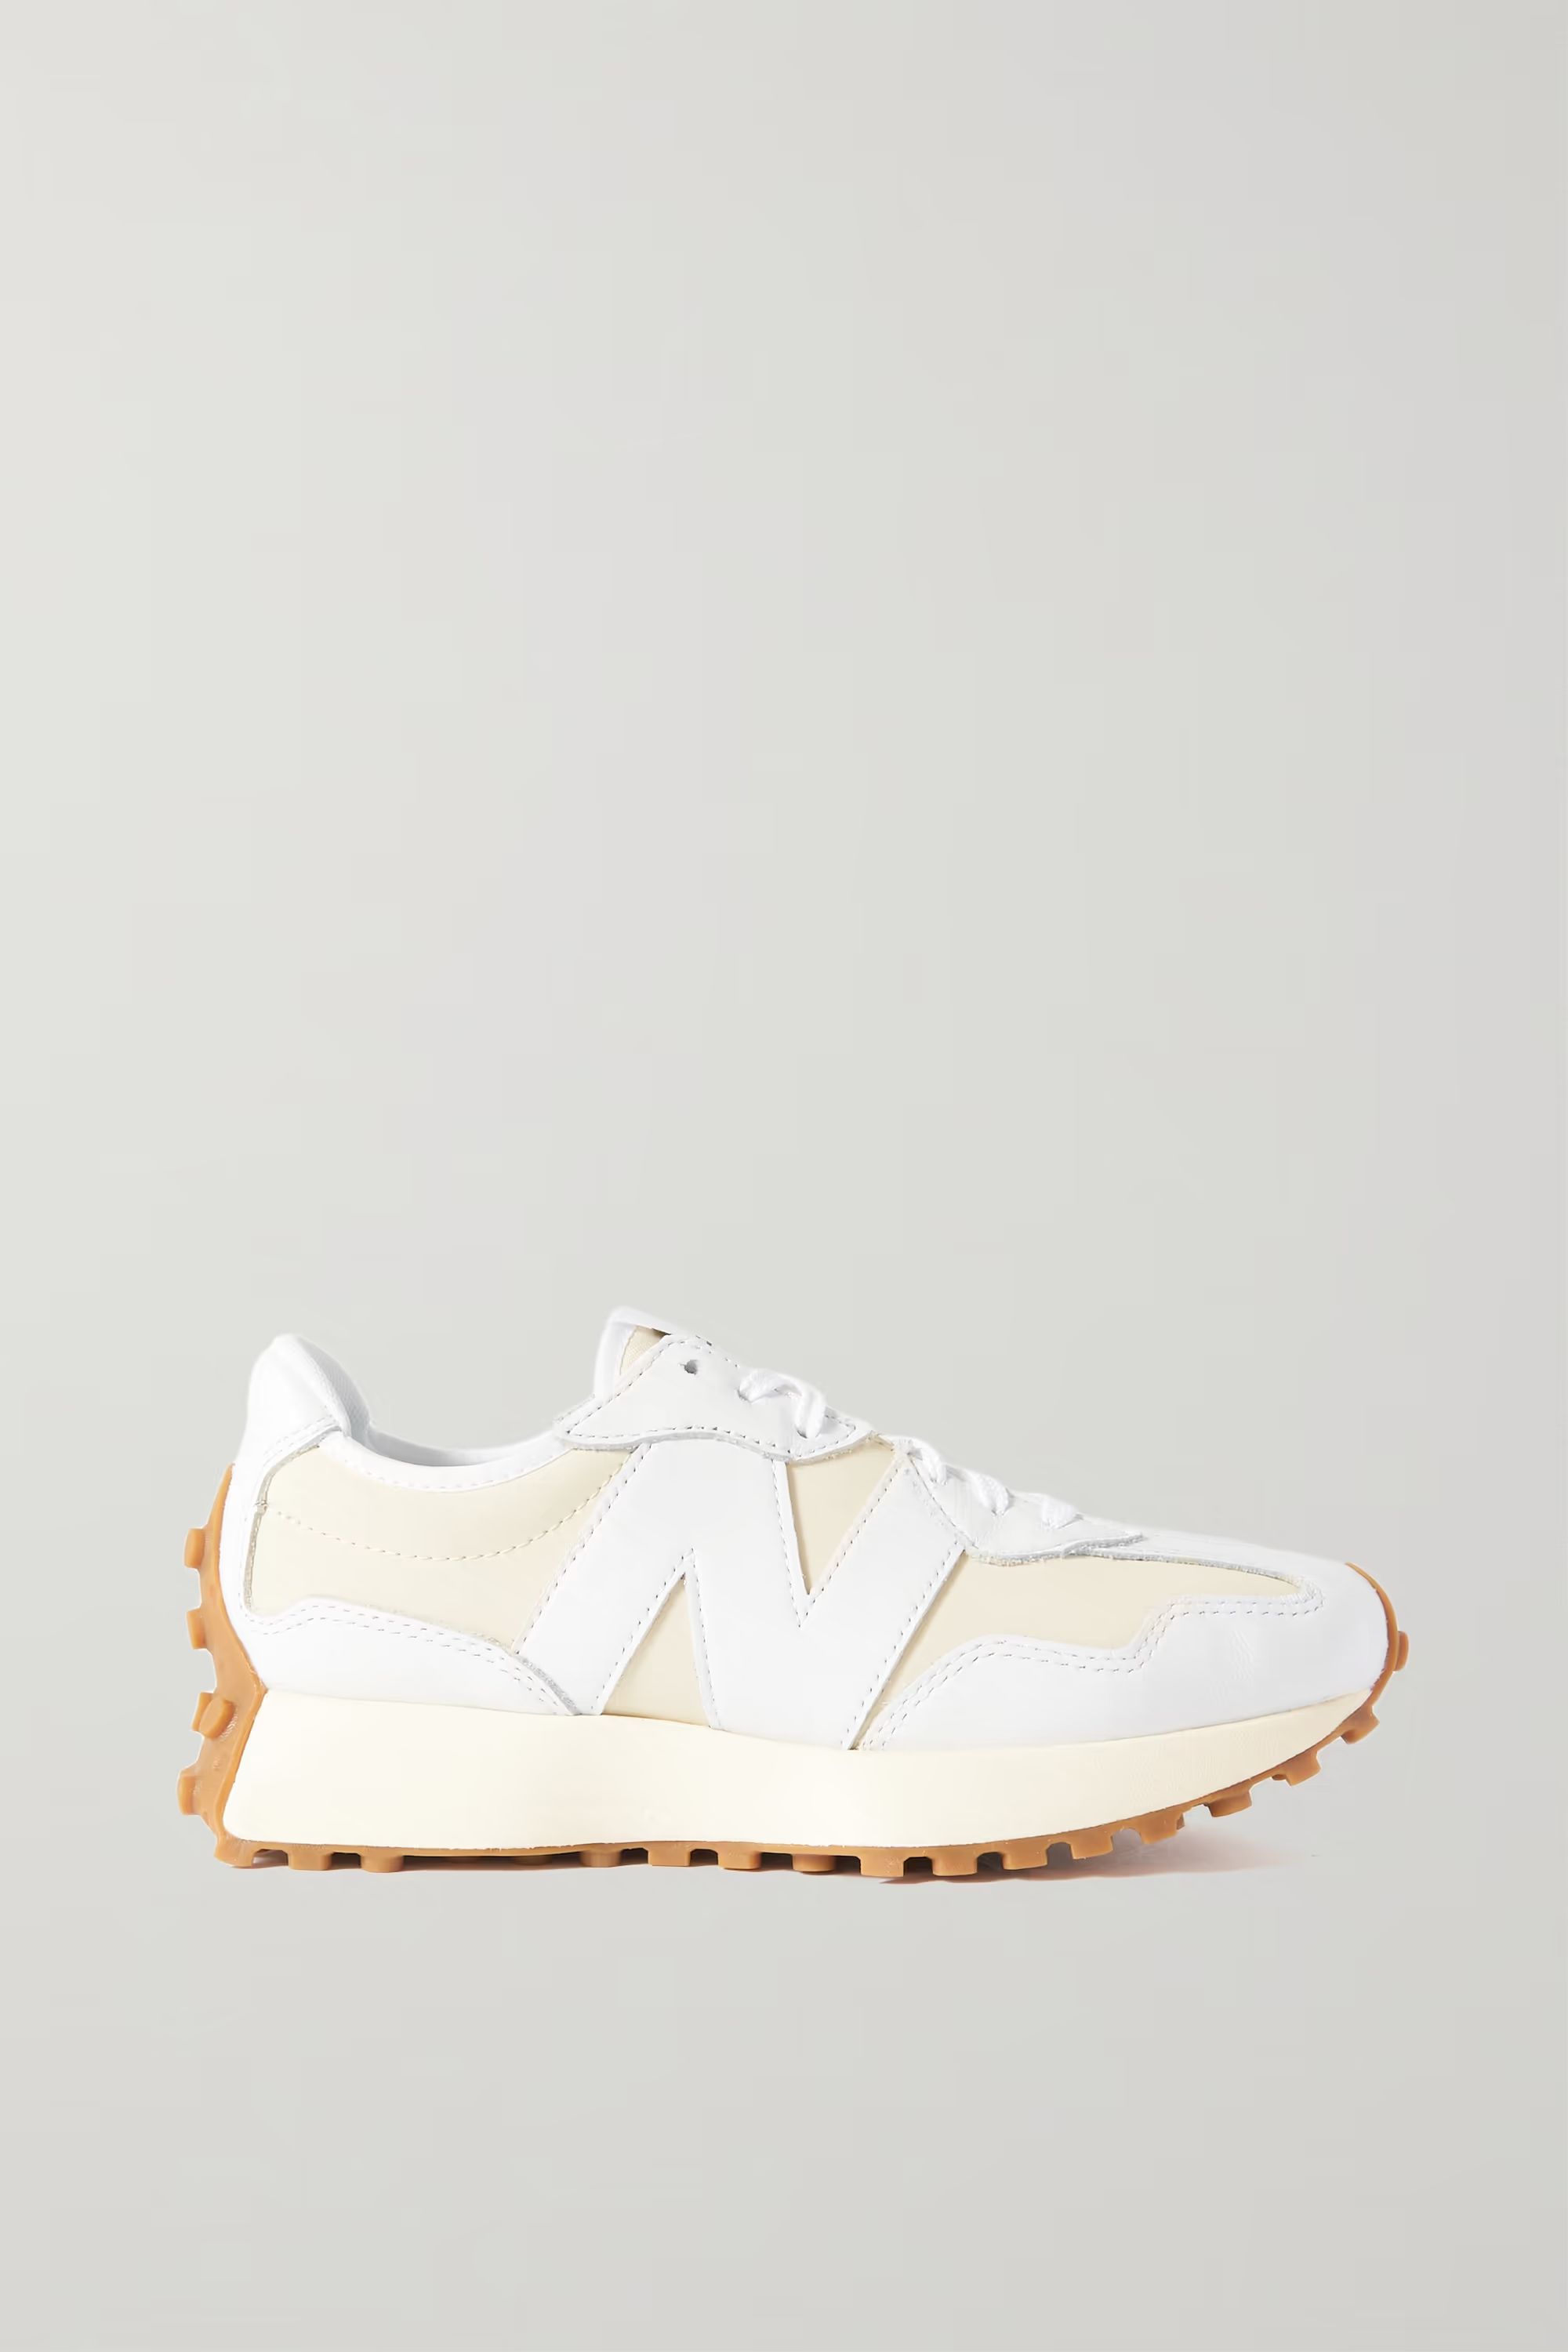 NEW BALANCE327 mesh-trimmed leather and nubuck sneakers | NET-A-PORTER (UK & EU)